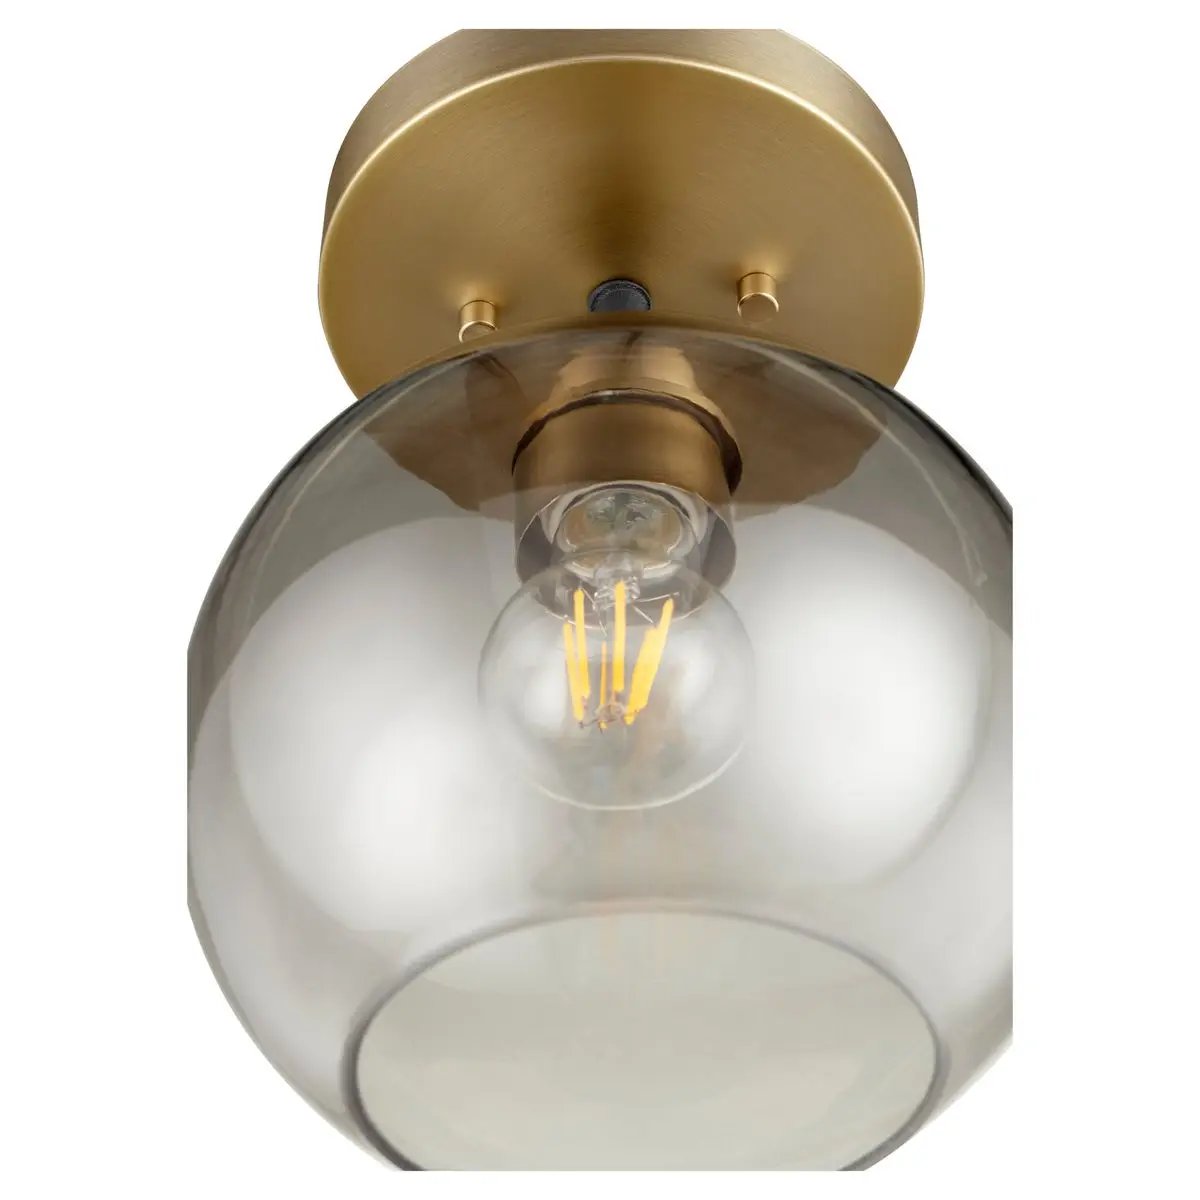 Transitional flush mount lighting with clear glass globe and elegant finishes. Soft diffusion of light for a glowing radiance. Perfect for adding sophistication to any space.